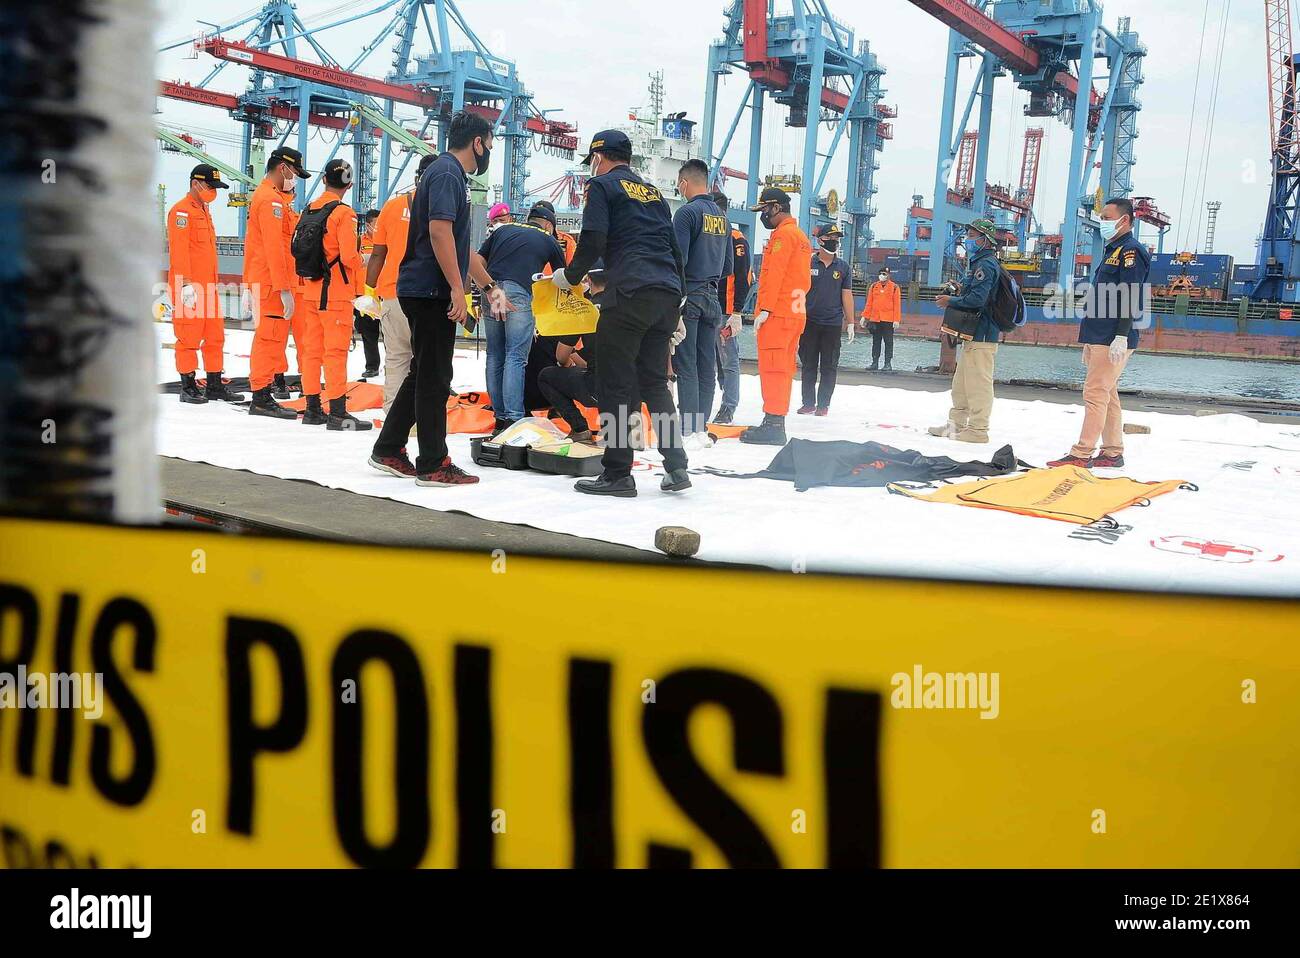 Indonesian Disaster Victim Identification (DVI) officers check remains including body parts recovered during the search operation of the wreckage of Sriwijaya Air plane SJ182, at Jakarta port, Indonesia, 10 January 2021. Remains of the aircraft along with human body found by search and rescue teams in the waters of the Thousand Islands. An Indonesian passenger aircraft with 62 people on board crashed into the sea after taking off from Jakarta, authorities said Saturday. The plane carried 50 passengers on board, including 10 children, plus 12 crew members. (Photo by Rahmat Dian Prasanto/INA P Stock Photo